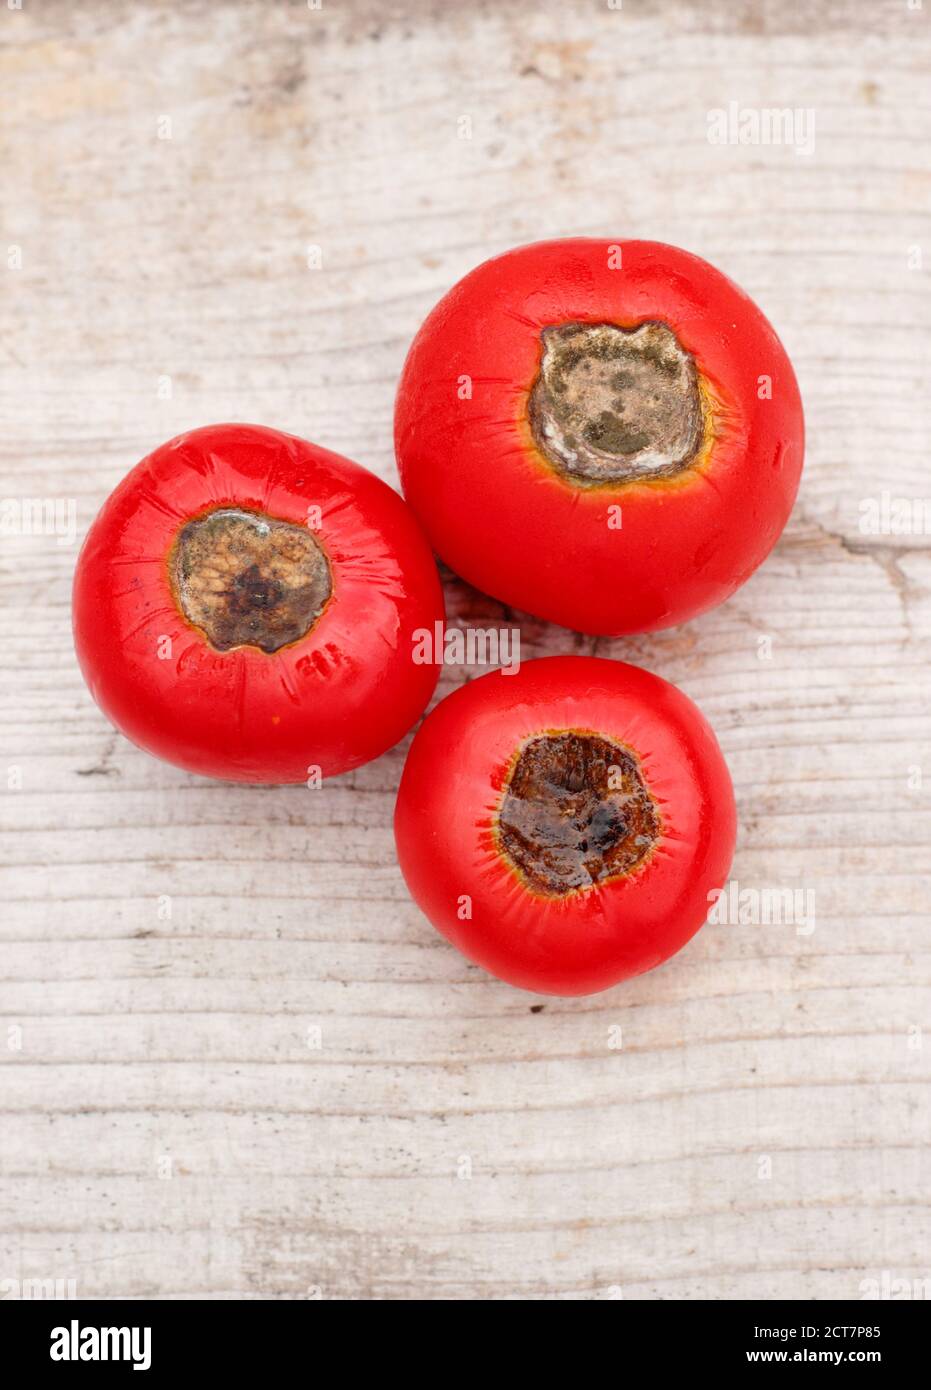 Home grown tomatoes with blossom end rot caused by lack of calcium and associated watering issues. Solanum lycopersicum 'Alicante'. Stock Photo